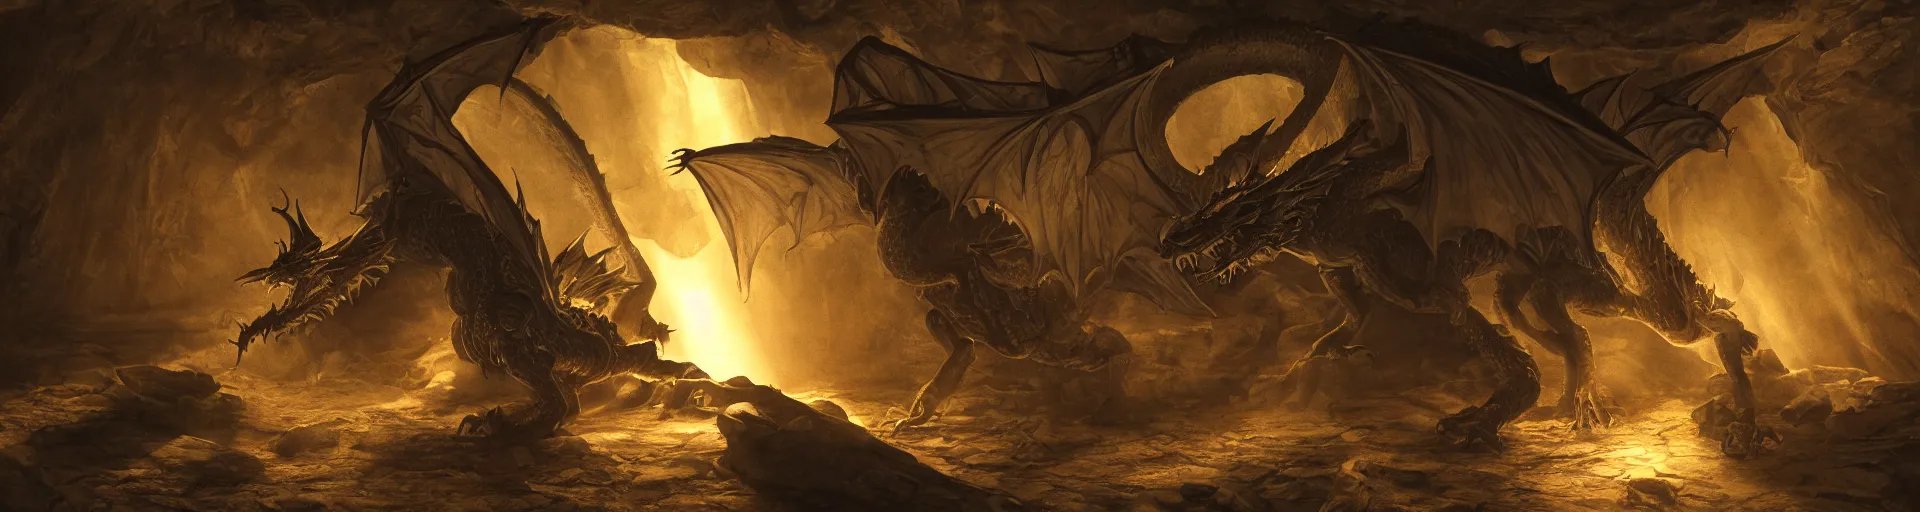 Image similar to A Dragon guards a vast treasure in it's lair, shafts of sunlight appear from missing parts of the interior. Chiaroscuro style painting. 4K.